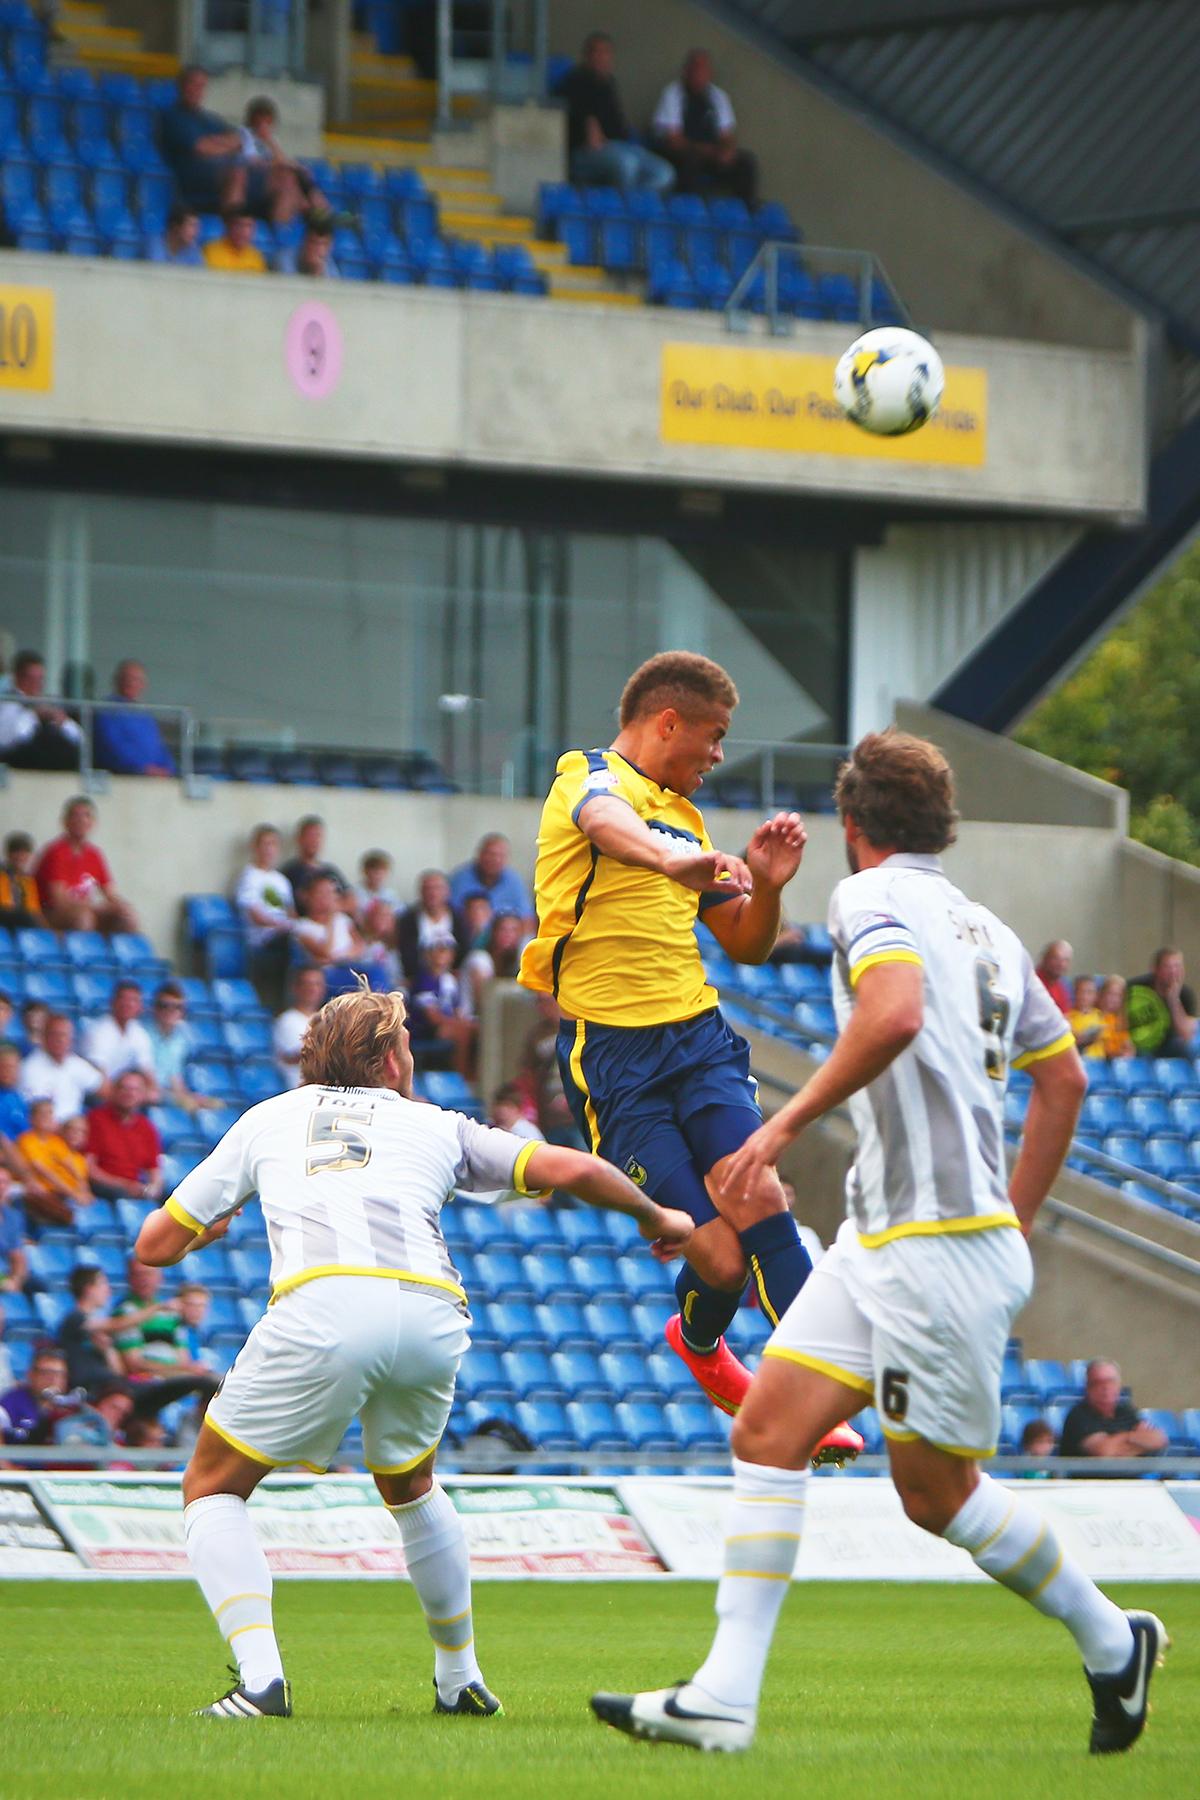 Pictures from United's 1-0 defeated at home to Burton Albion on the first day of the 2014 football season.